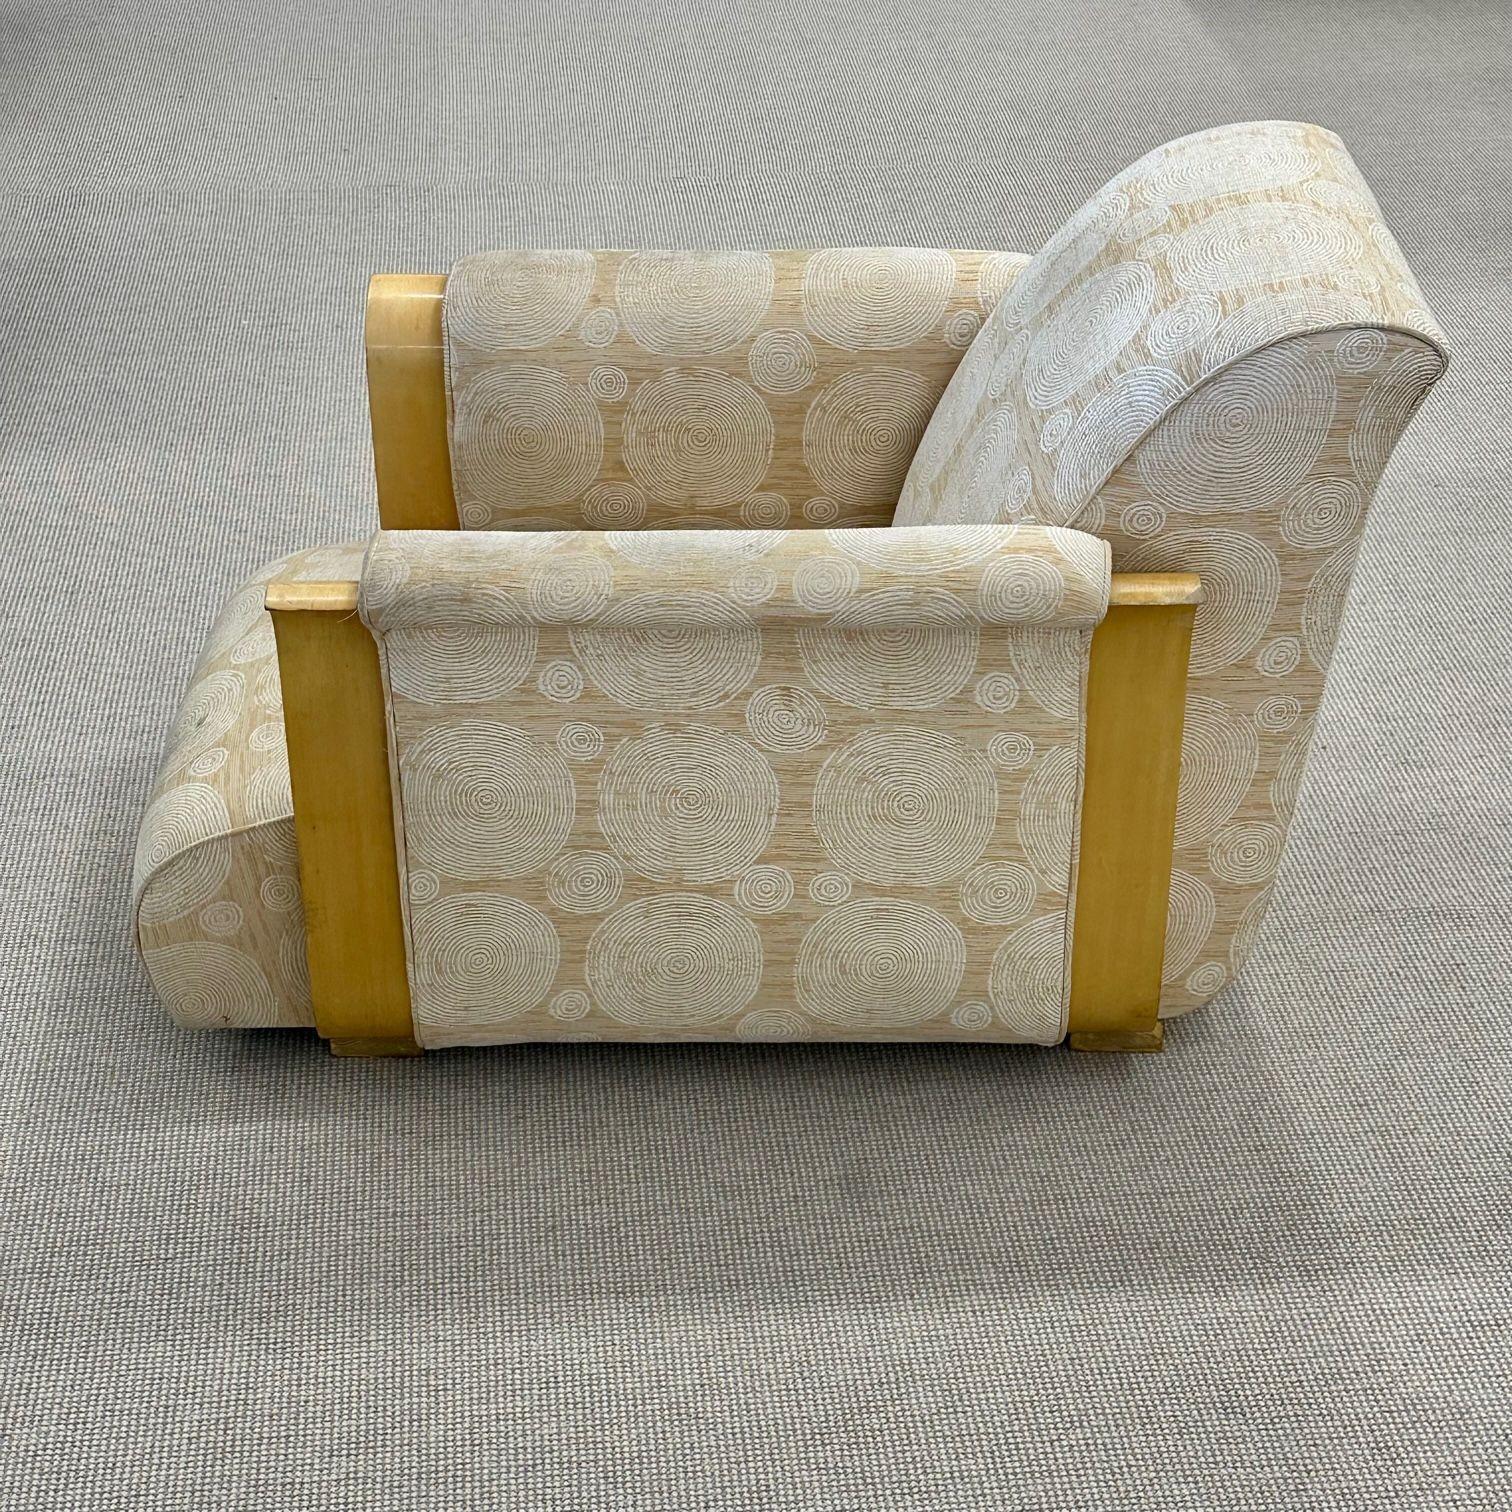 Rare Pair of French Art Deco Lounge Chairs by Michel Dufet, France, 1930s For Sale 10